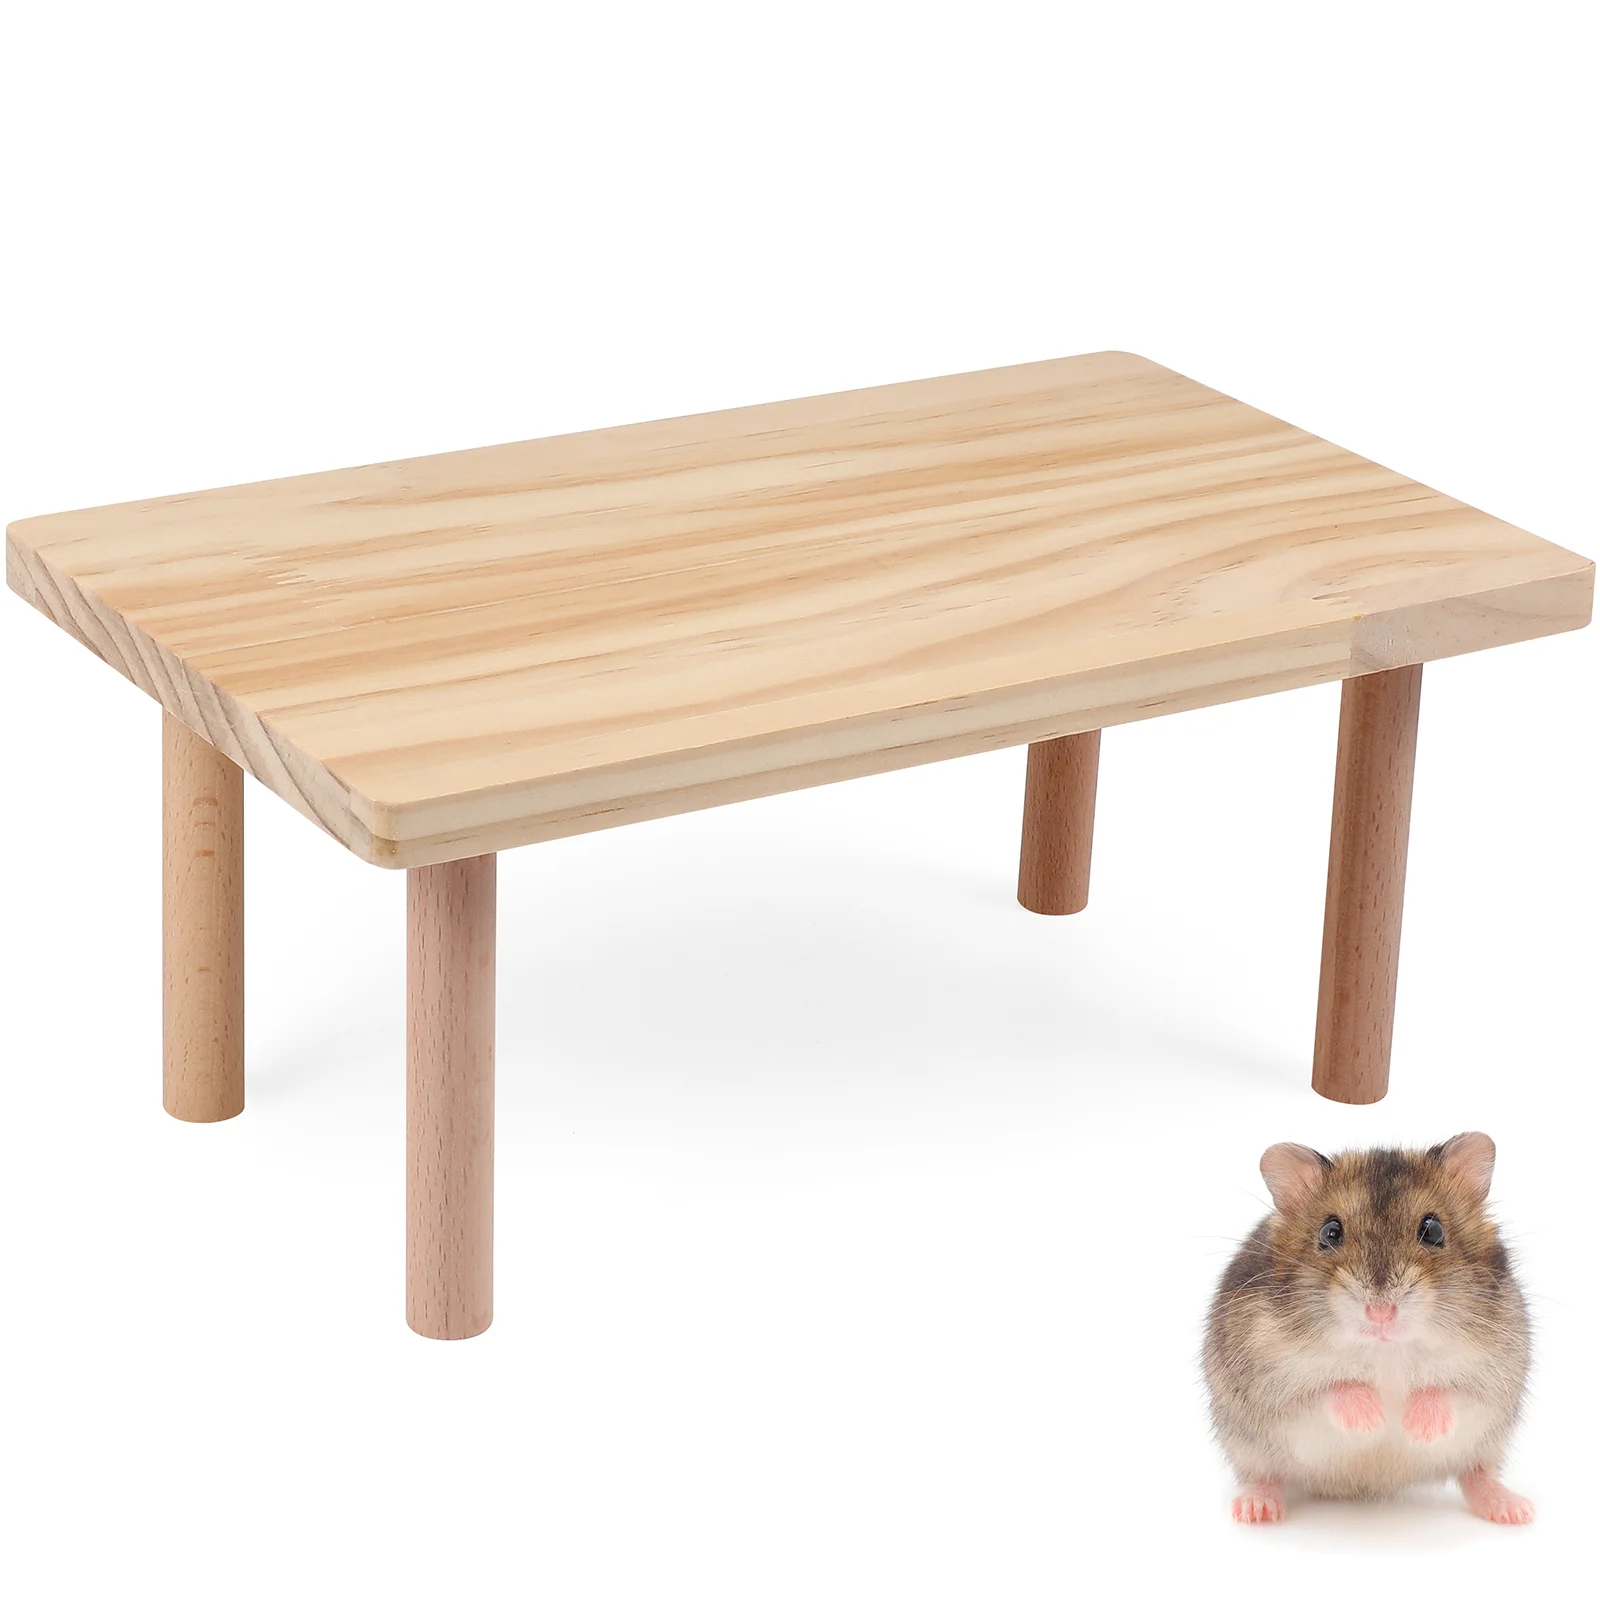 

Hamster Play Wooden Platform Small Pet Playing Stand Putting Food Bowl Water Table Cage Accessory Dog bed